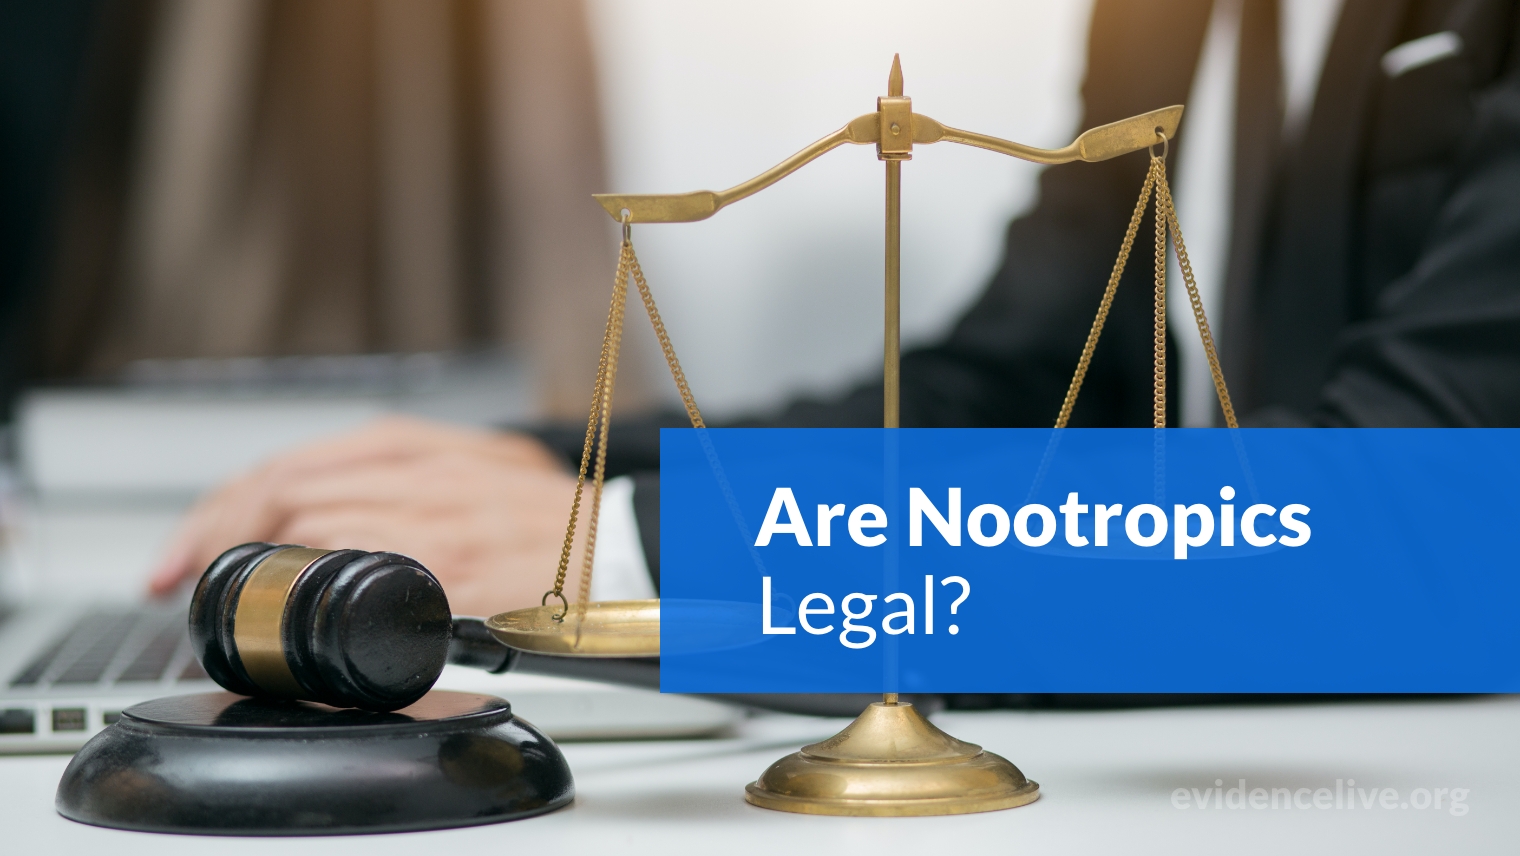 Are Nootropics Legal or Illegal? A Guide On International Rules